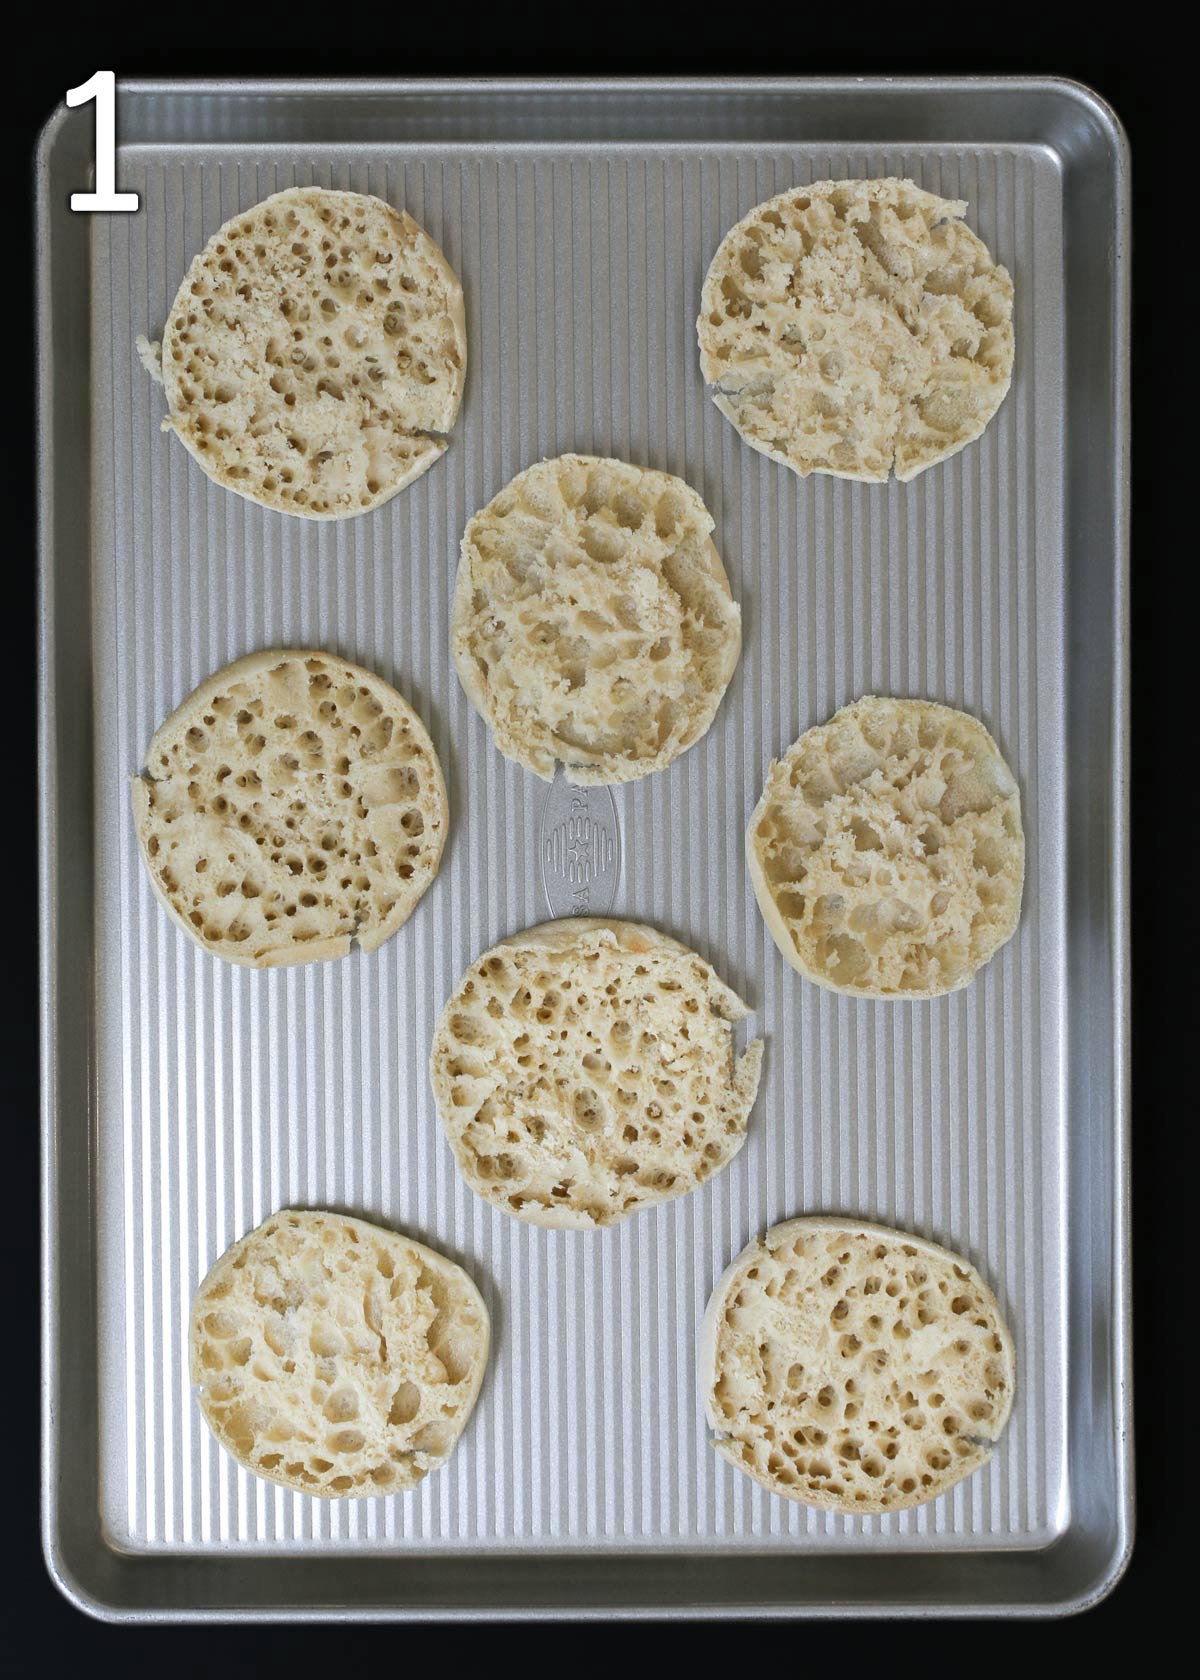 split english muffins laid out on baking sheet.